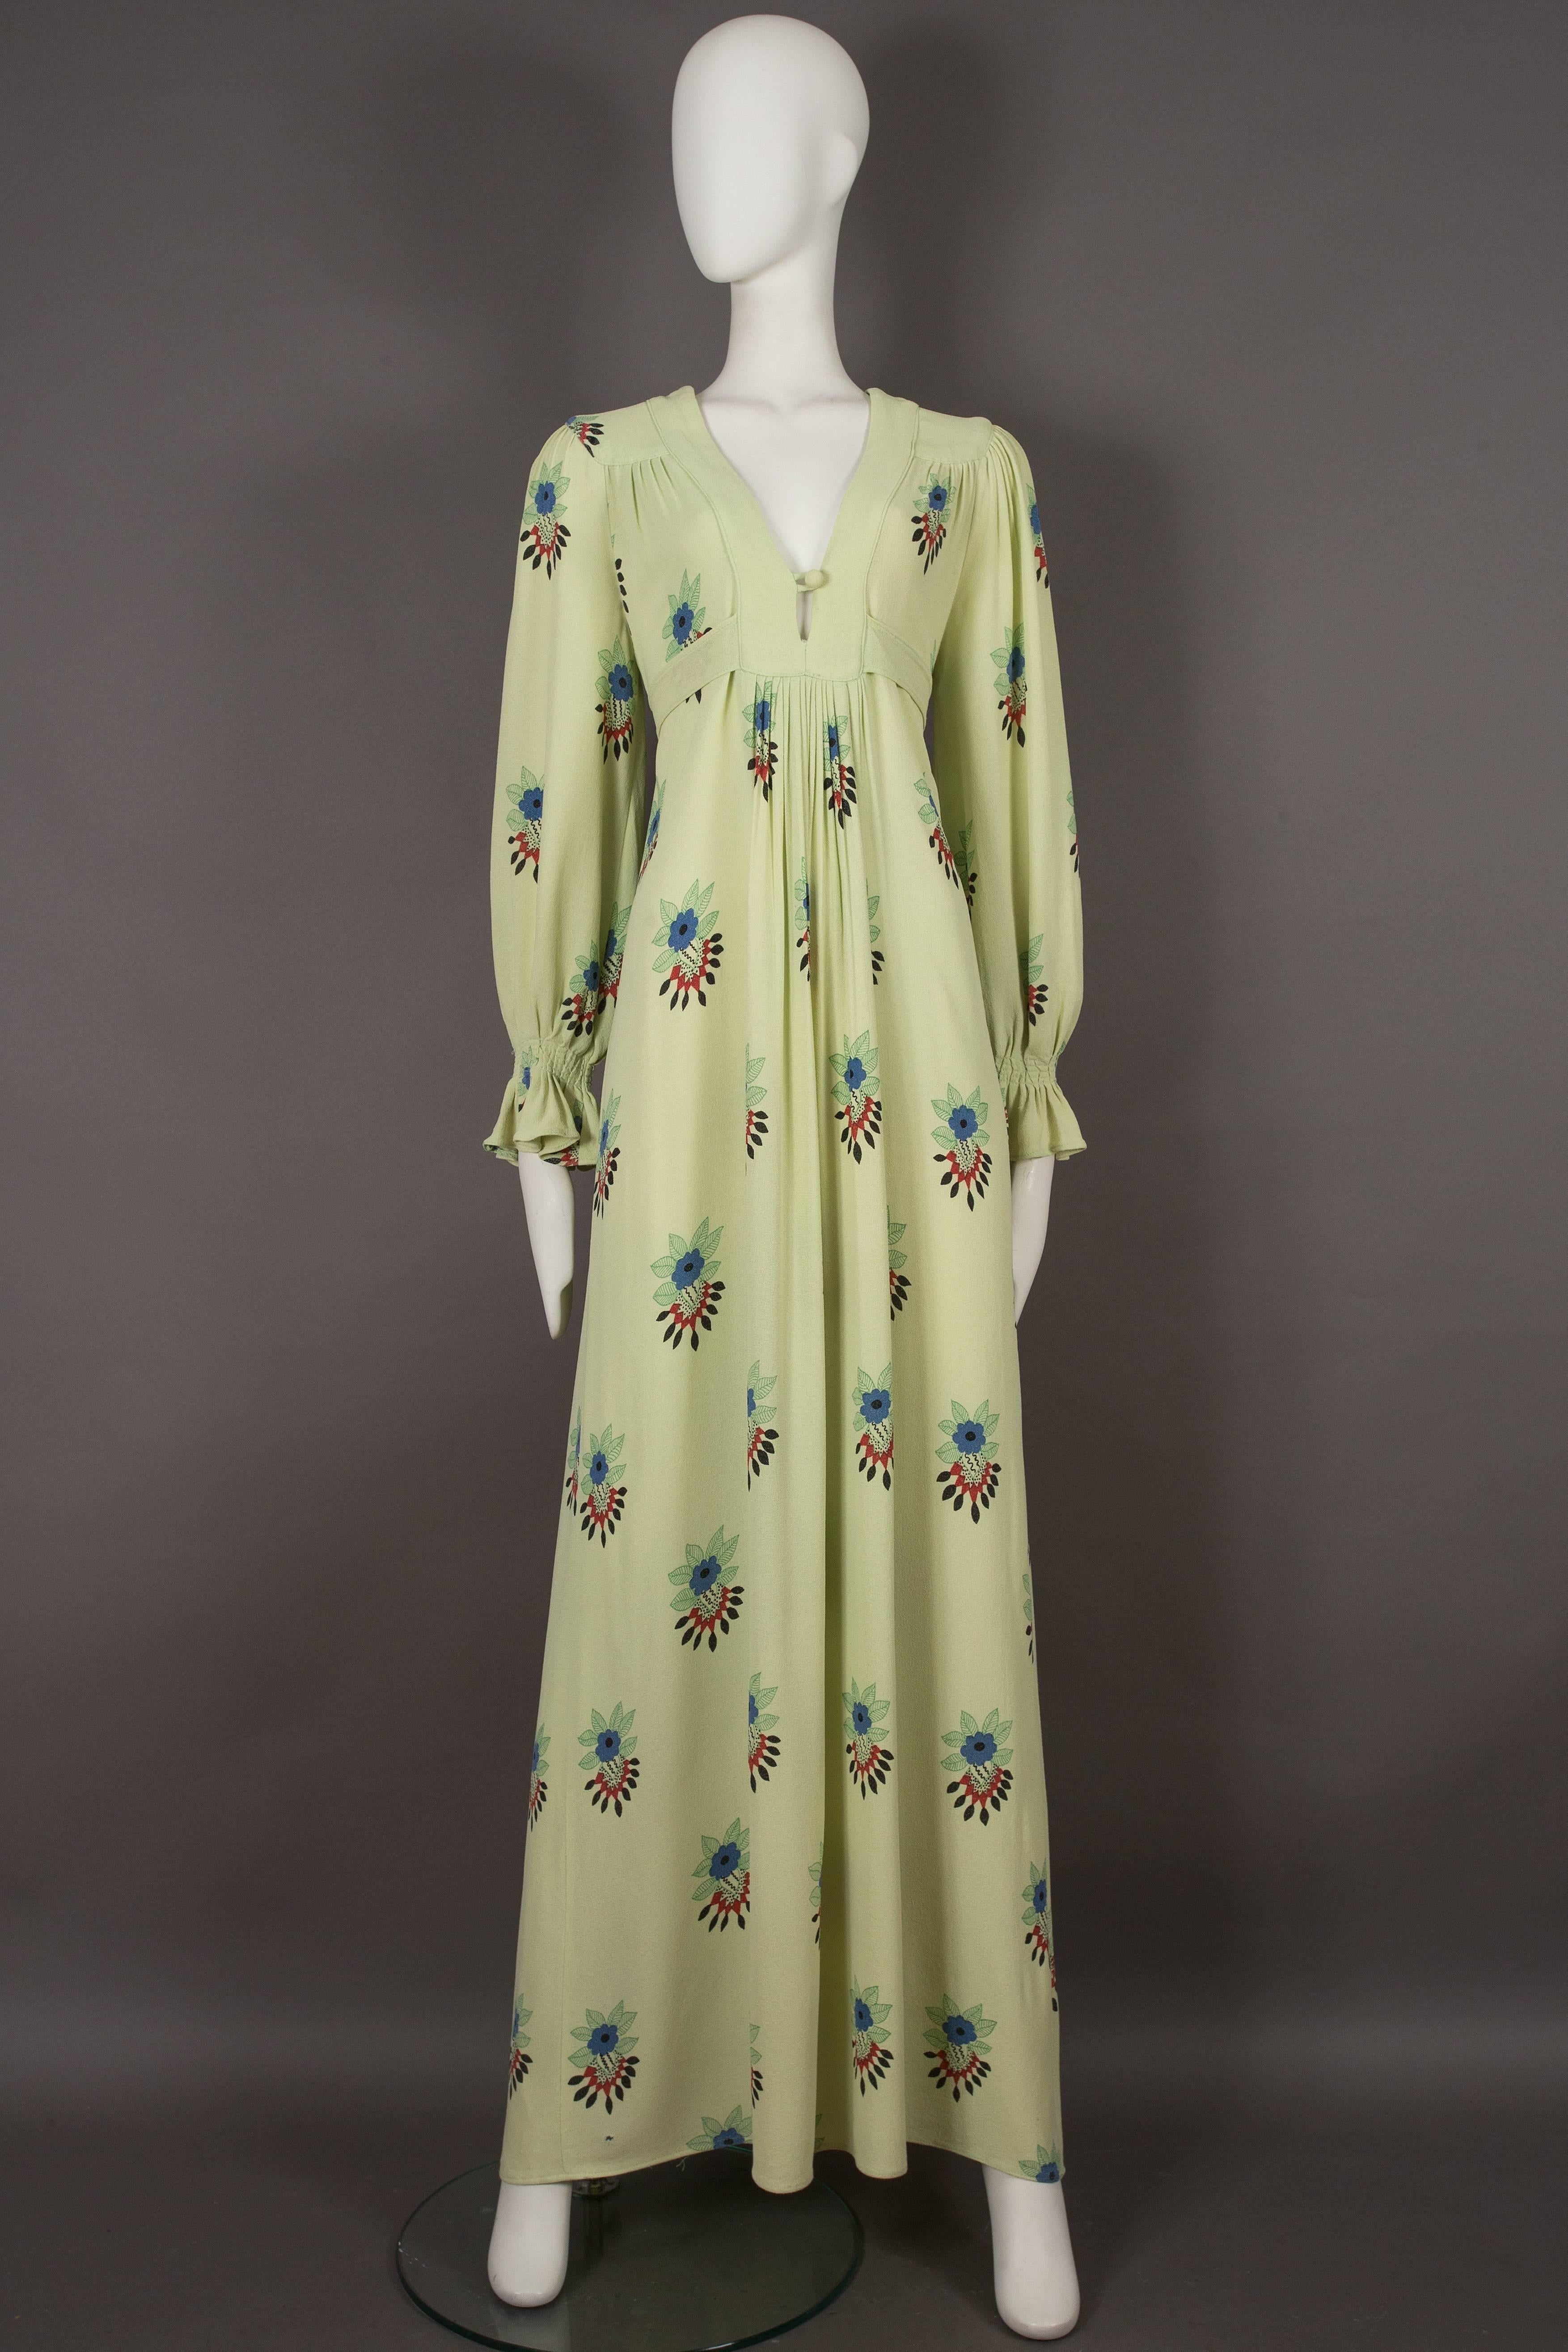 A rare Ossie Clark moss crepe maxi dress, circa 1970s. The dress features one of Celia Birtwell's iconic prints throughout on a lime green base, pleated bishop sleeves with shirred cuffs, waist ties which fasten at the rear and a v-neck with a